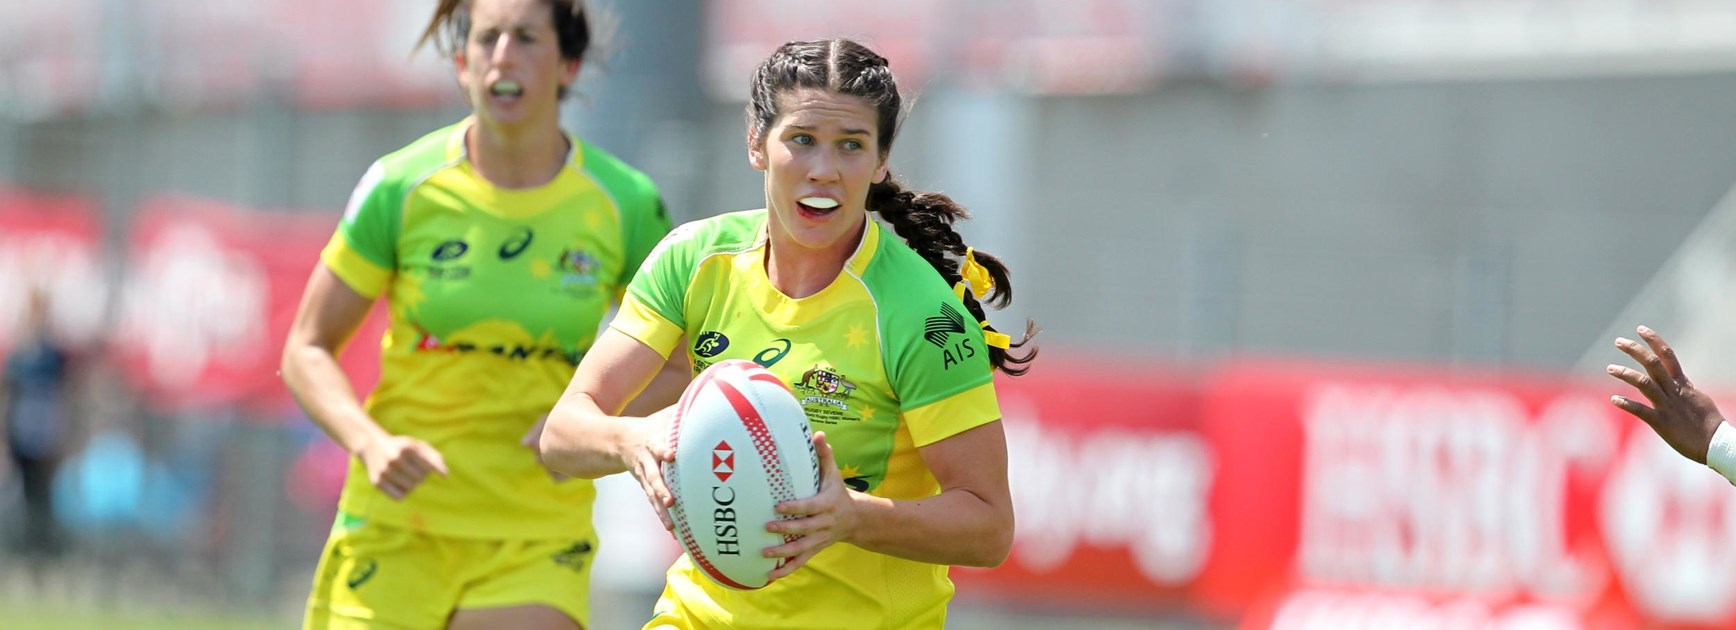 Charlotte Caslick representing Australia at the Women's World Sevens Series in France in 2016.